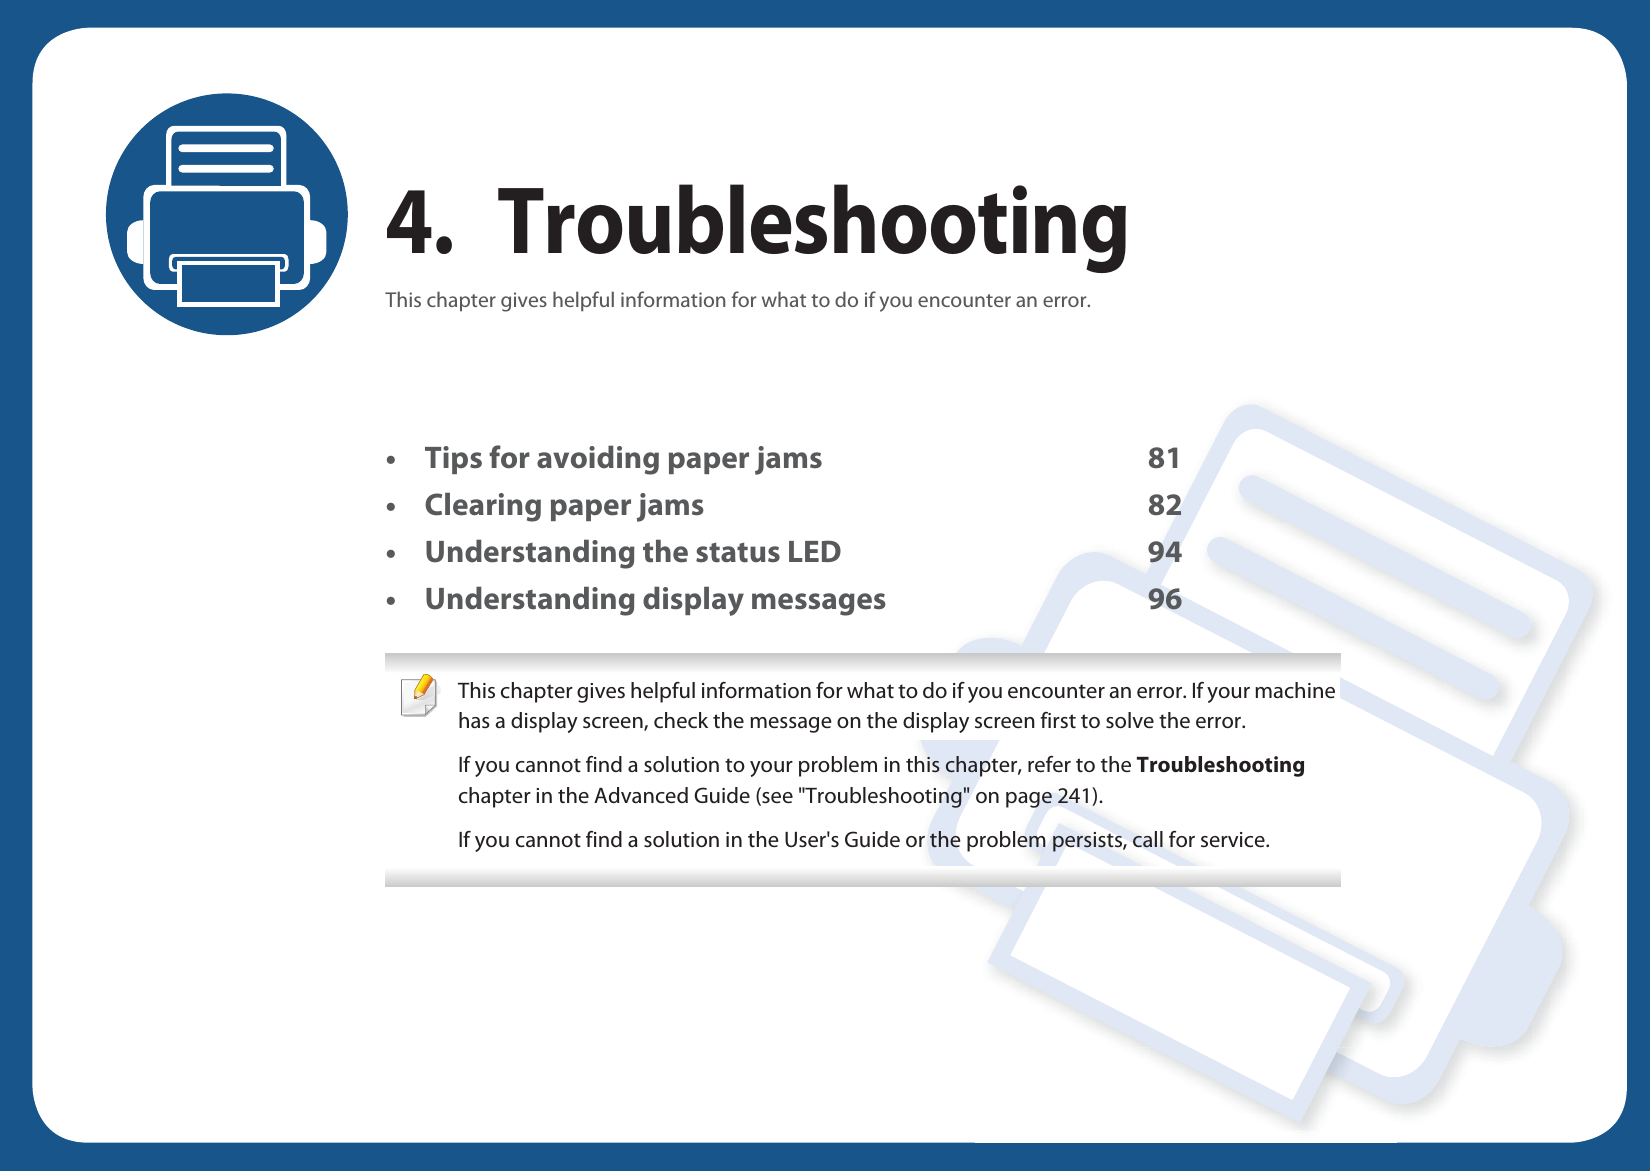 4. TroubleshootingThis chapter gives helpful information for what to do if you encounter an error.• Tips for avoiding paper jams 81• Clearing paper jams 82• Understanding the status LED 94• Understanding display messages 96 This chapter gives helpful information for what to do if you encounter an error. If your machine has a display screen, check the message on the display screen first to solve the error.If you cannot find a solution to your problem in this chapter, refer to the Troubleshooting chapter in the Advanced Guide (see &quot;Troubleshooting&quot; on page 241).If you cannot find a solution in the User&apos;s Guide or the problem persists, call for service.  